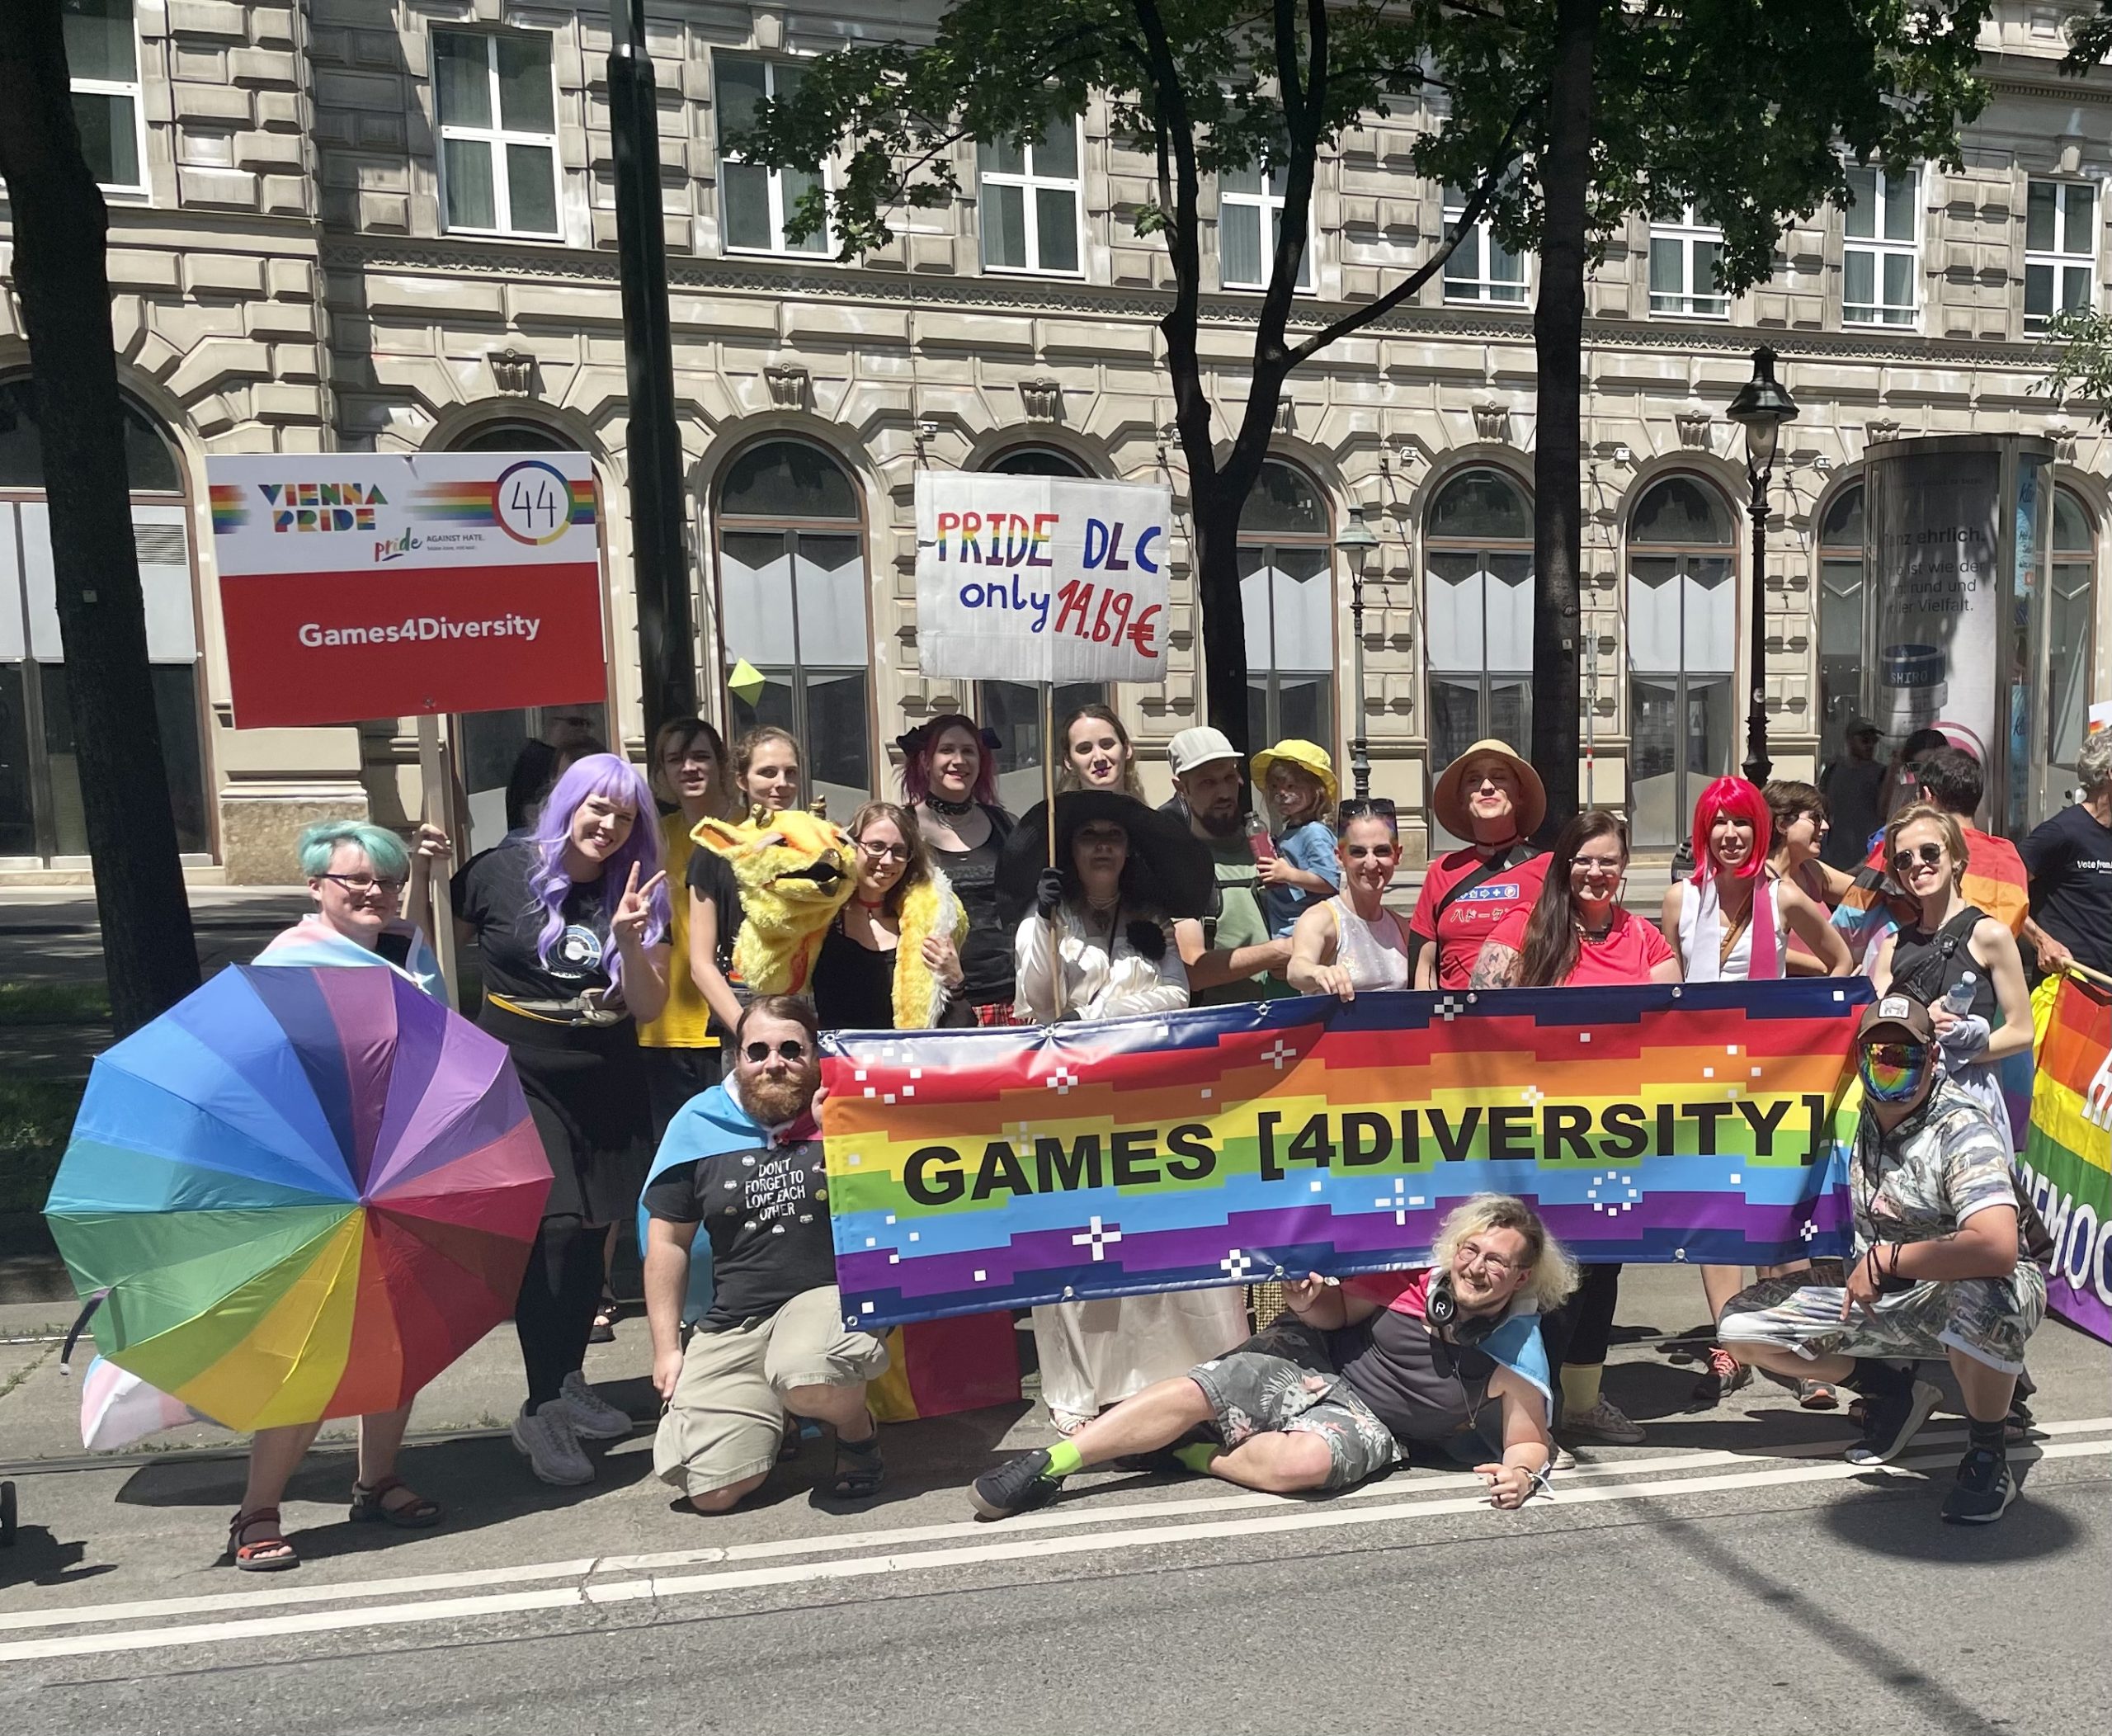 group picture of game developers at vienna pride